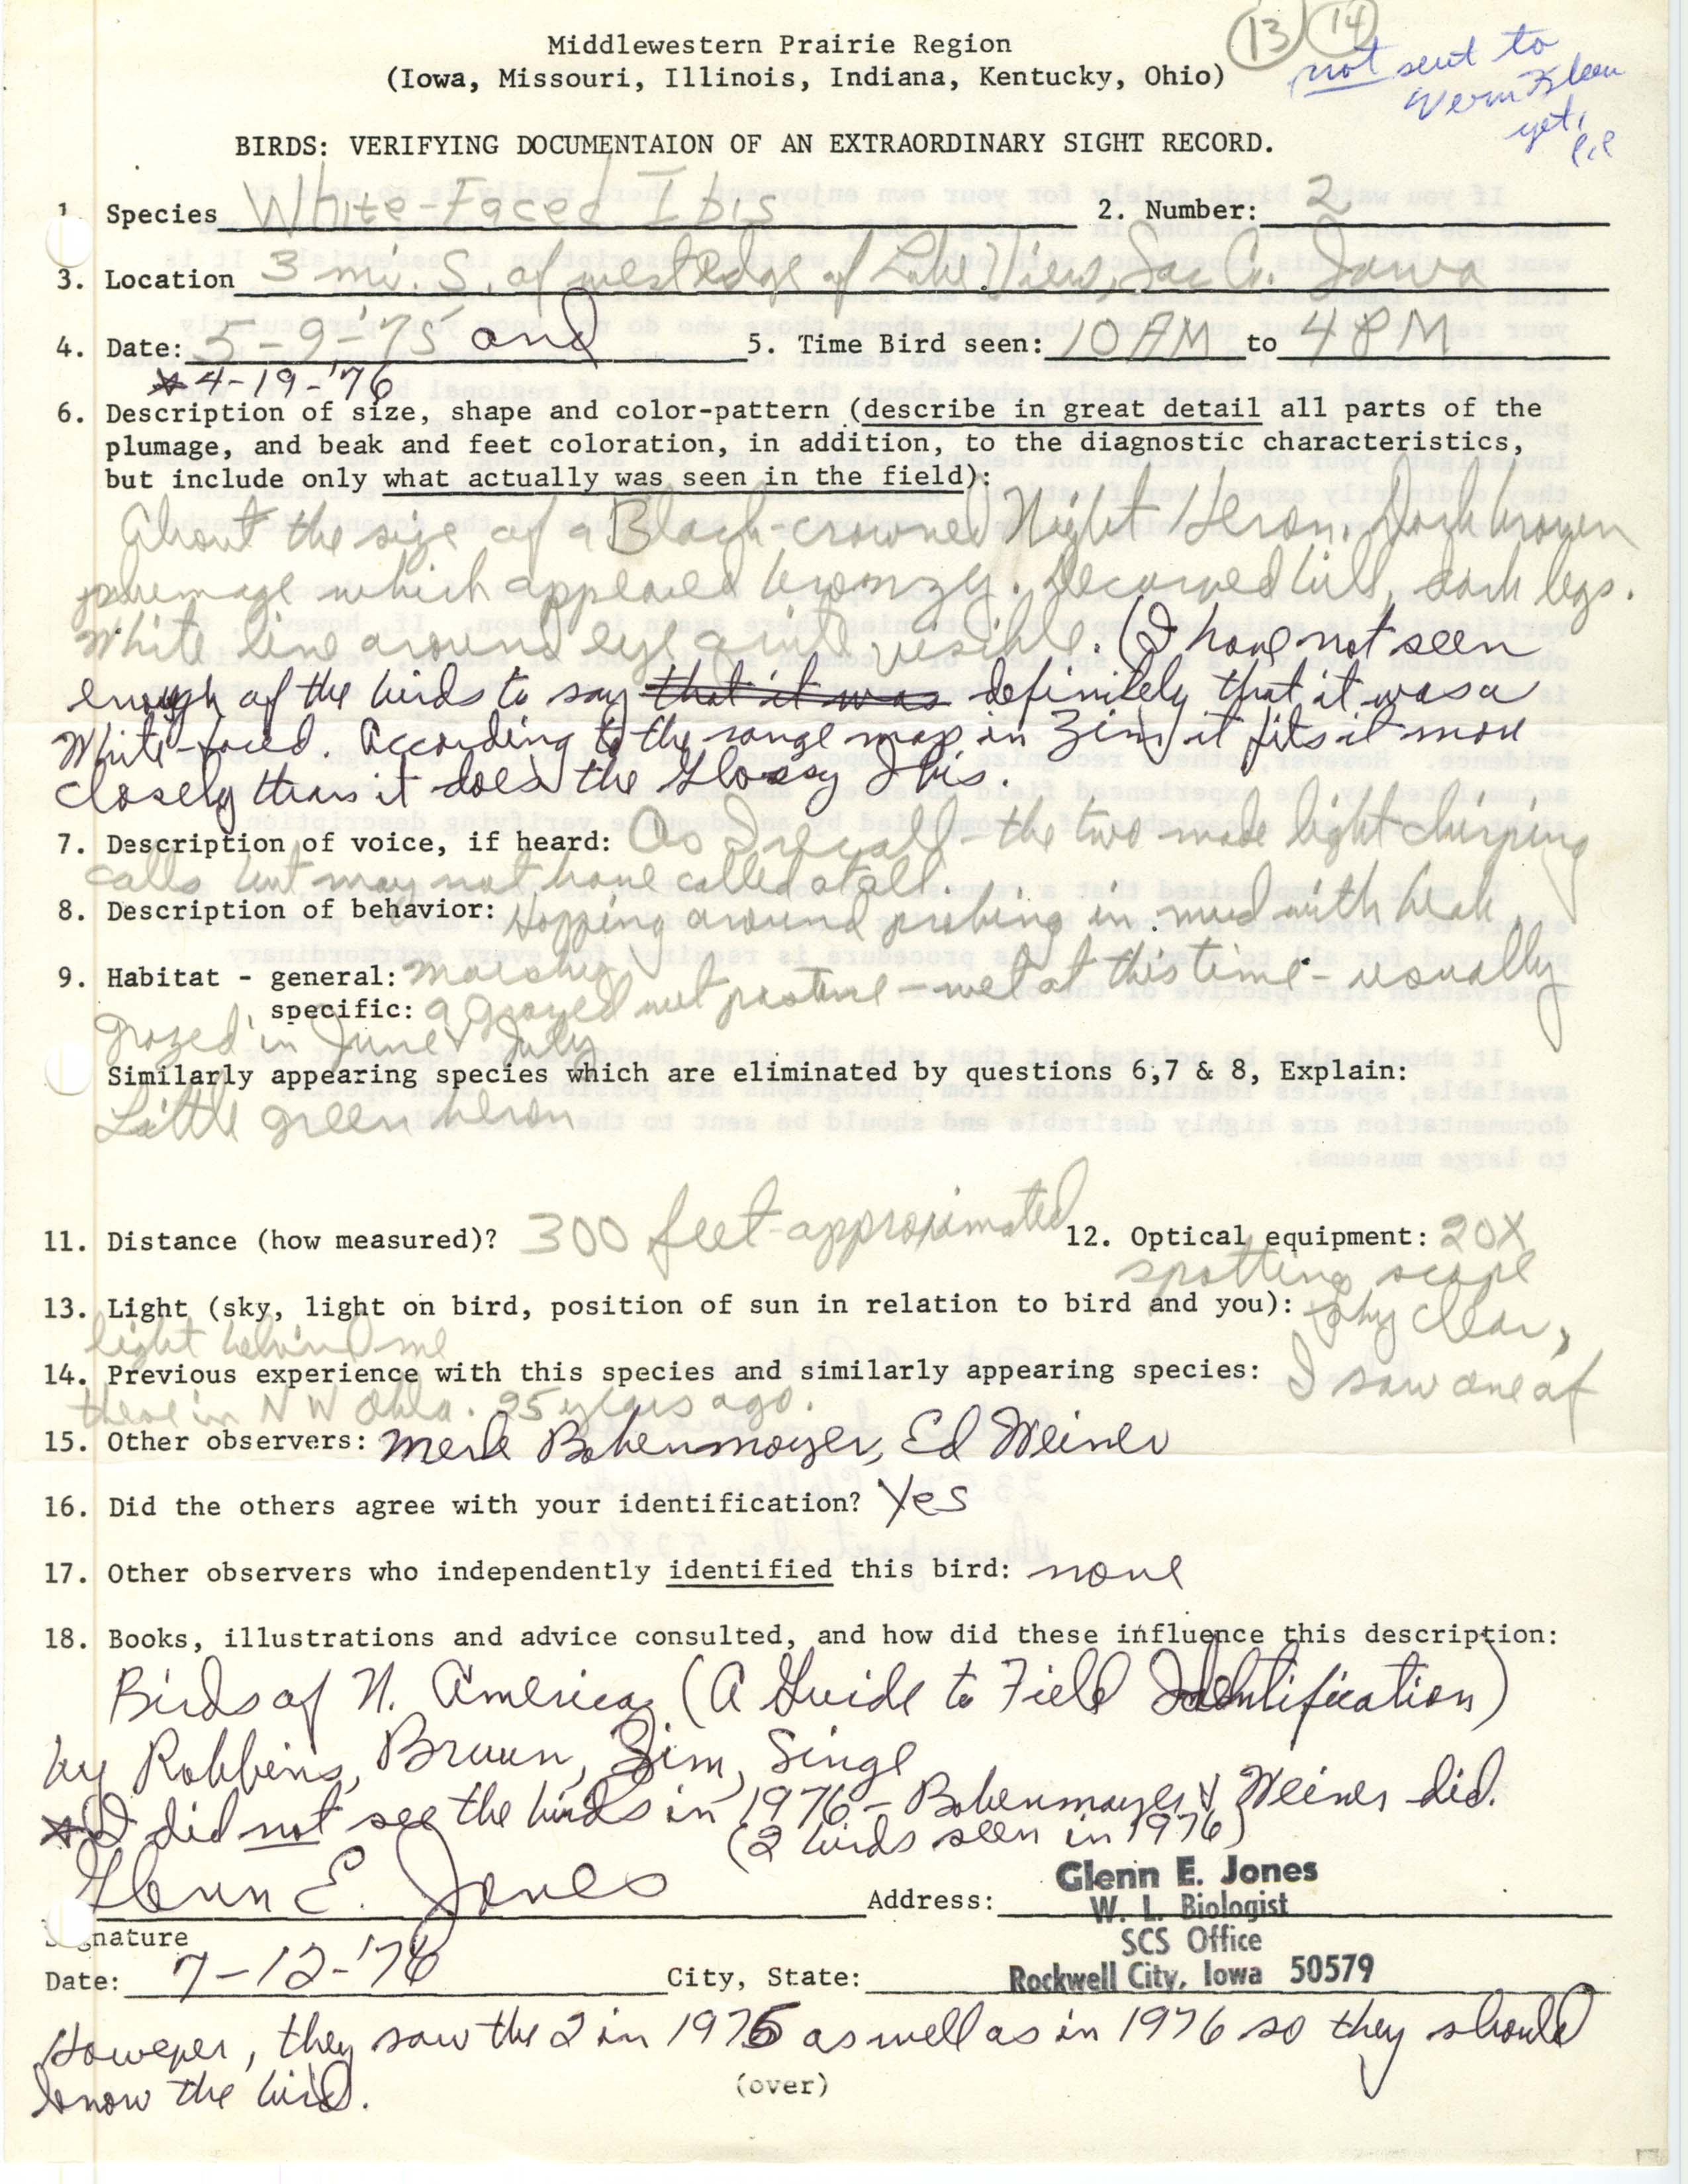 Rare bird documentation form for White-faced Ibis at Lake View, 1975